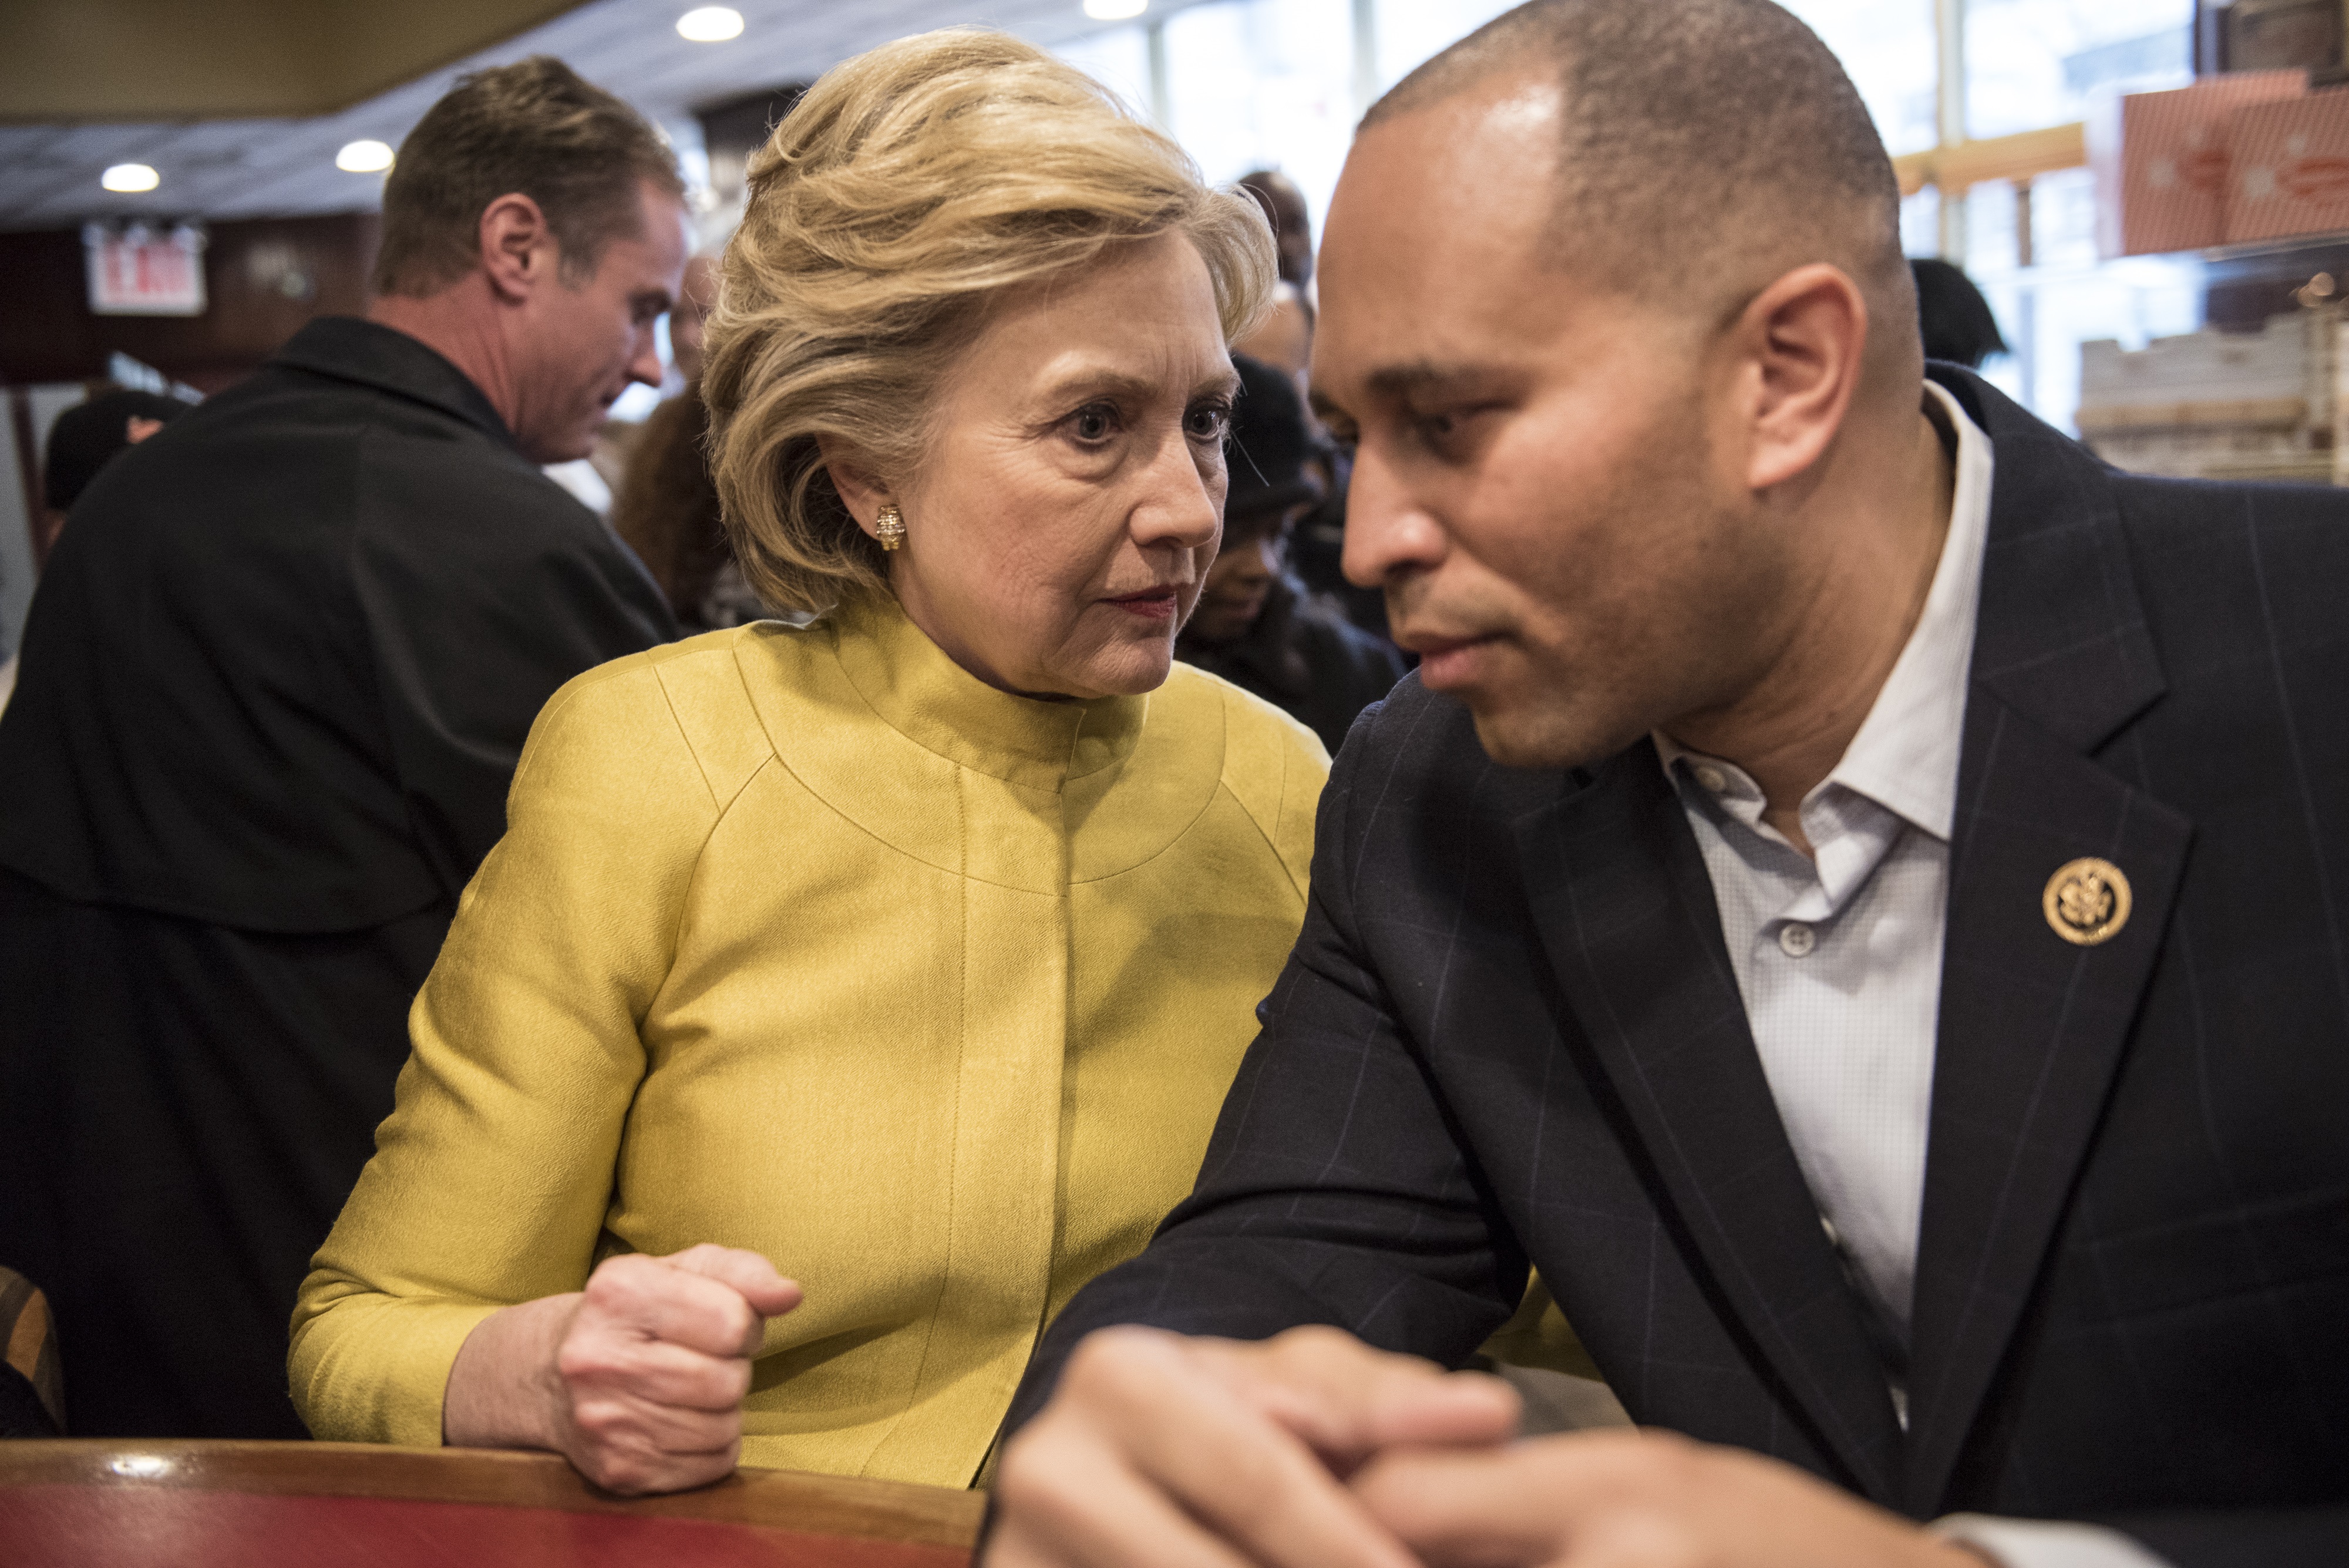 Hillary Clinton confers with Congressman Hakeem Jeffries at Junior's Restaurant in Brooklyn before the April Democratic primary.